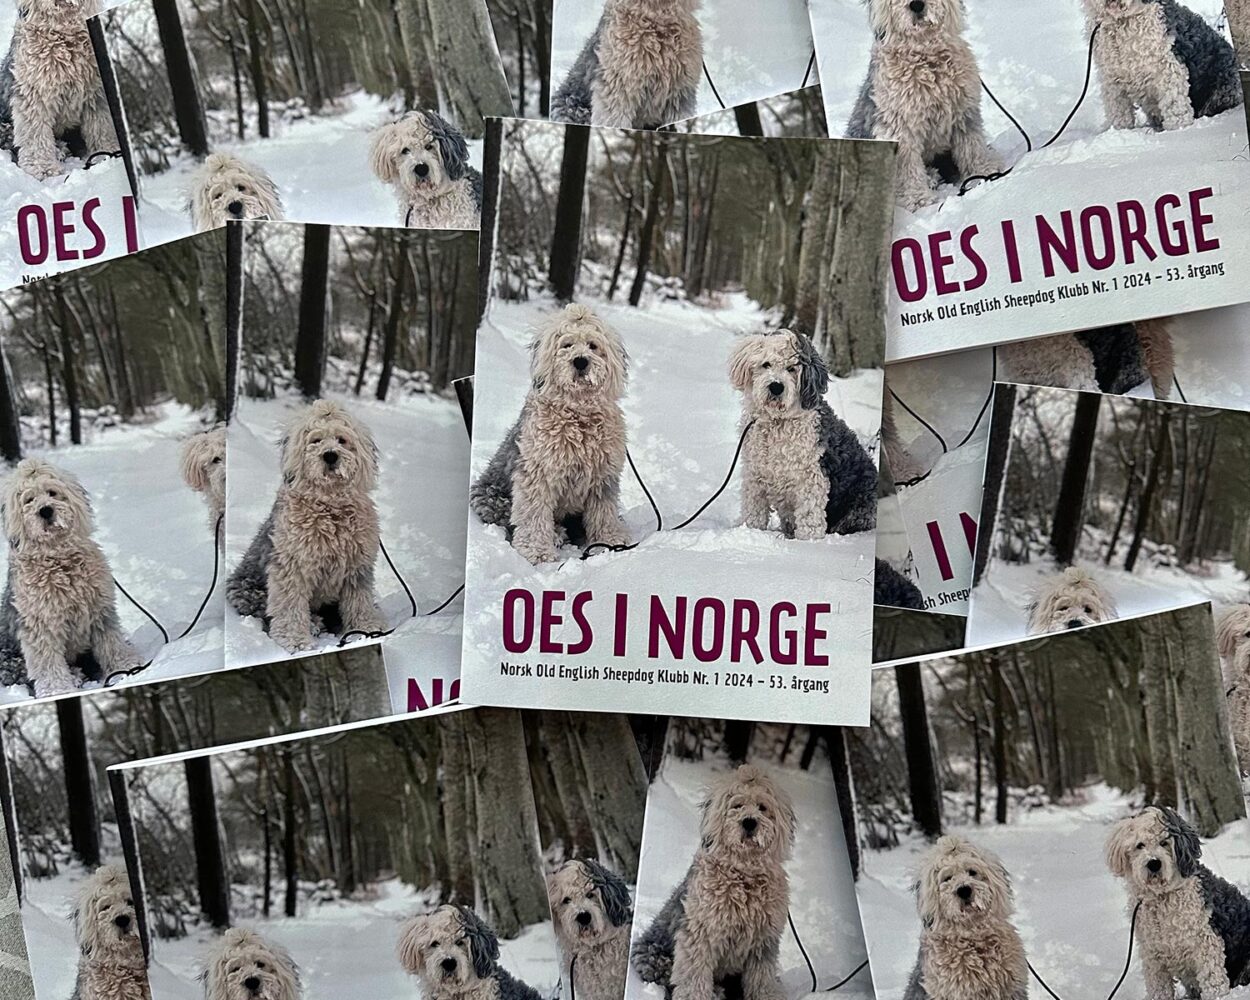 Medlemsblad for Old English Sheepdogs i Norge